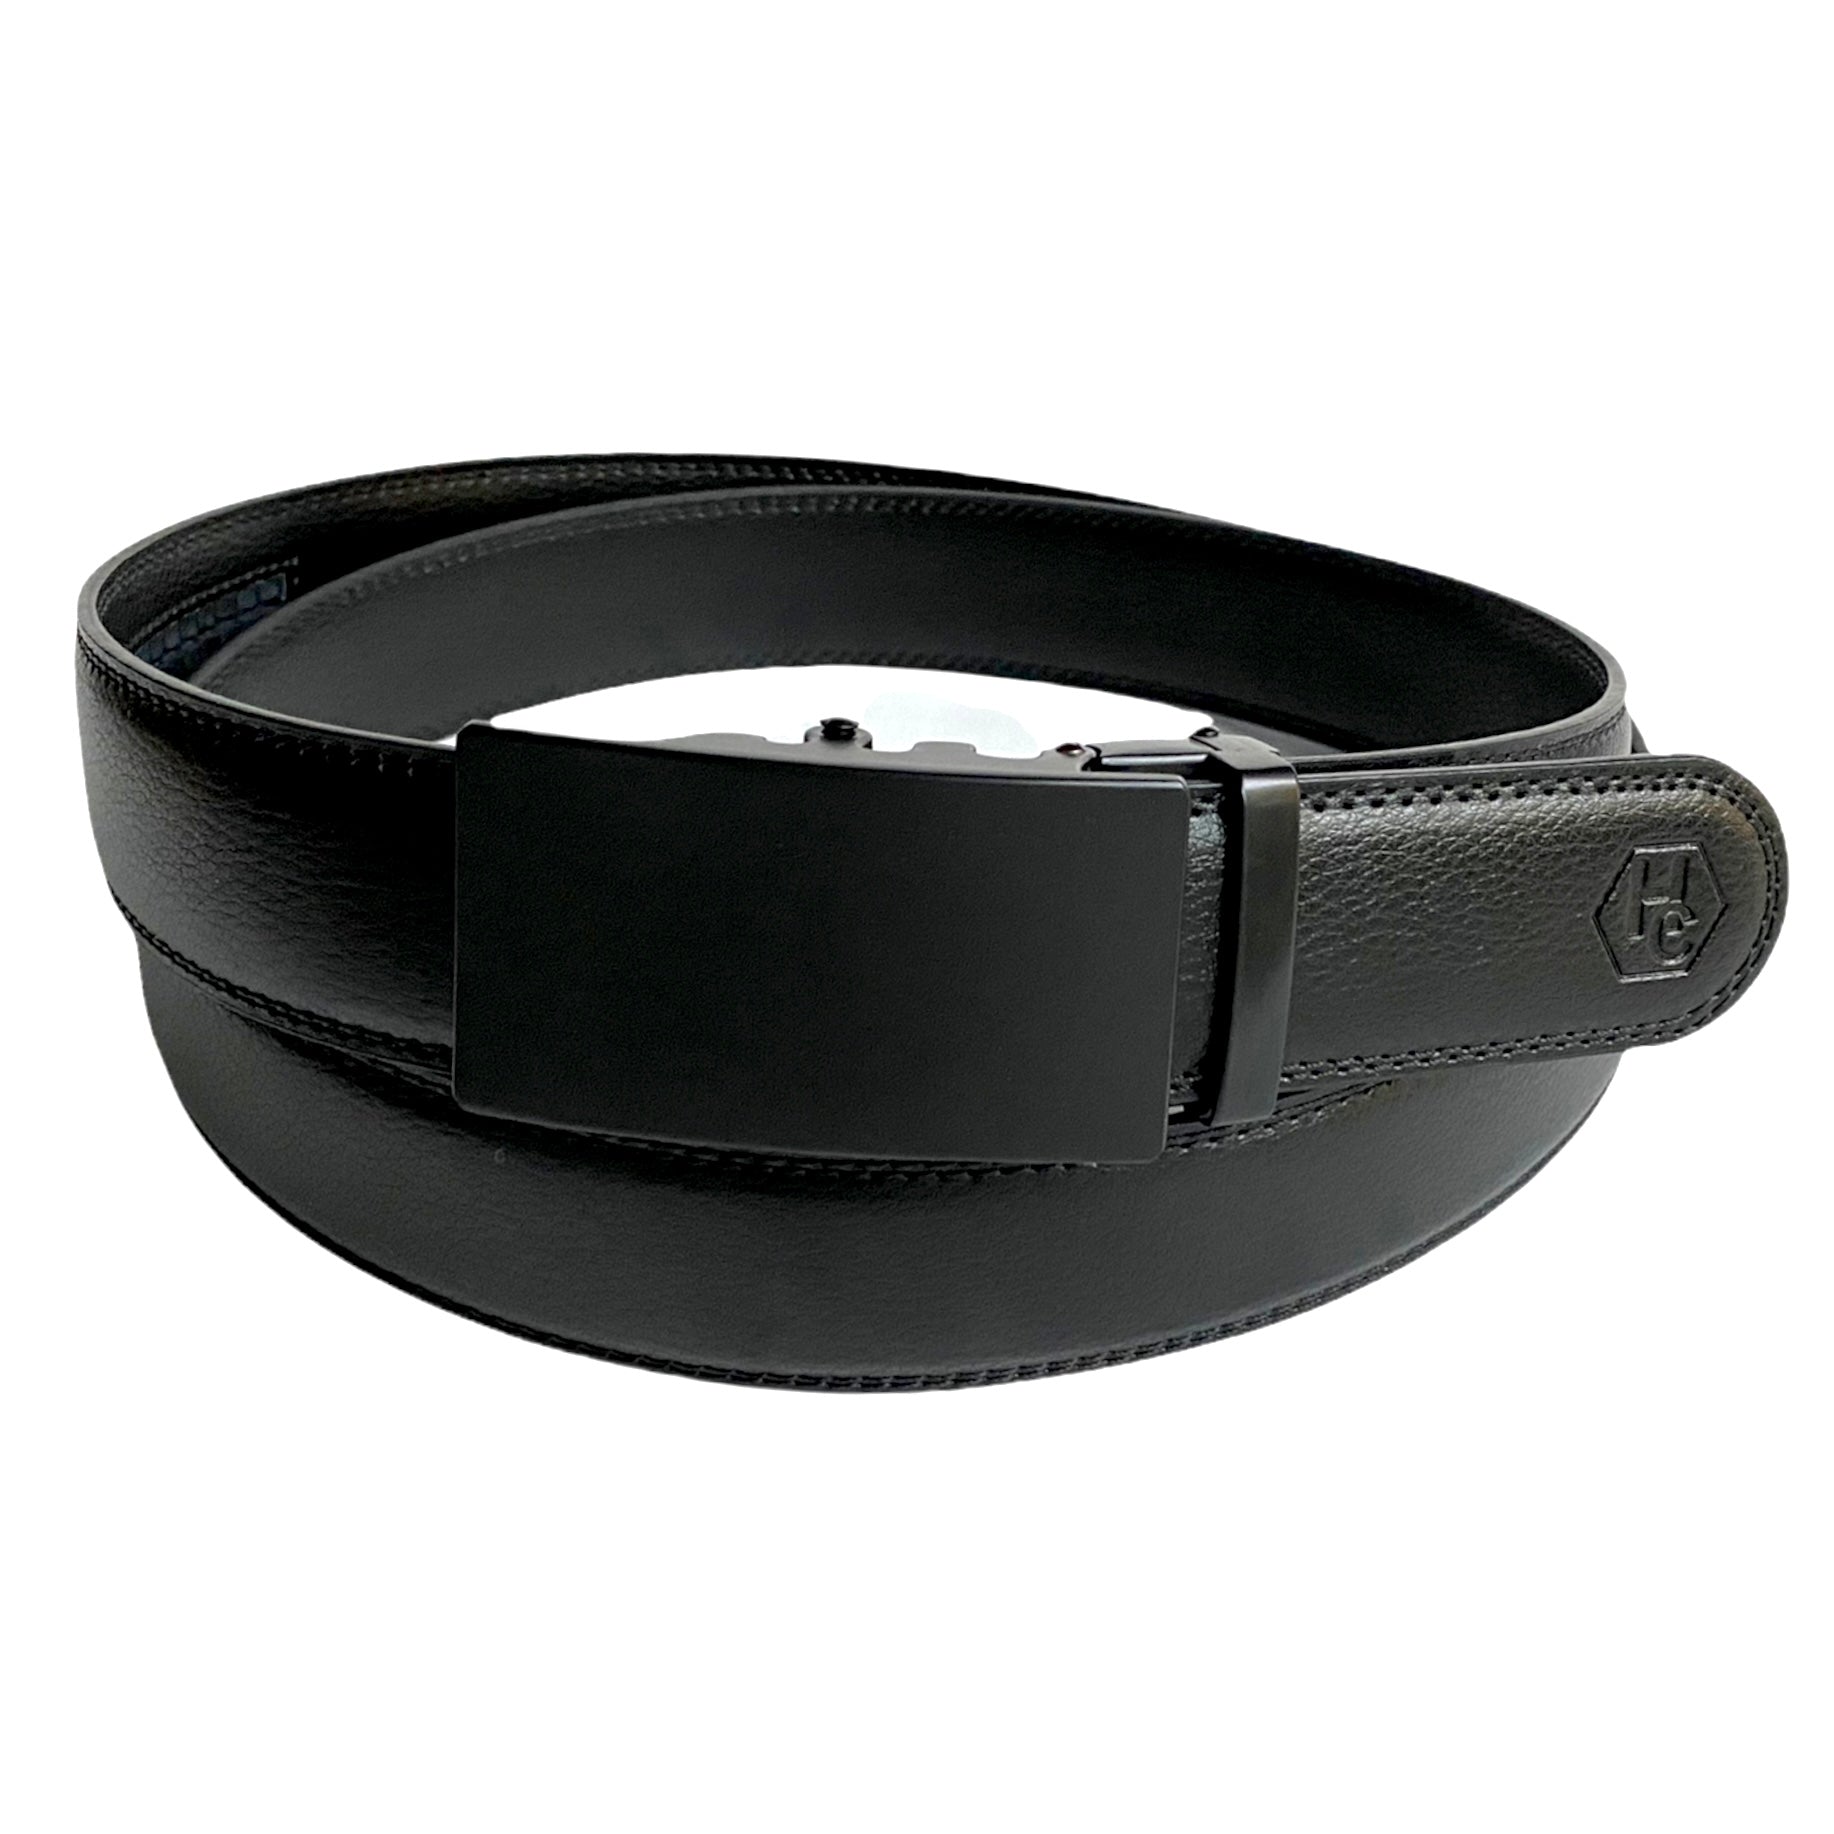 1.38" Genuine Leather Black Strap And 1.38" Automatic Belt Buckle Black 24710780453015